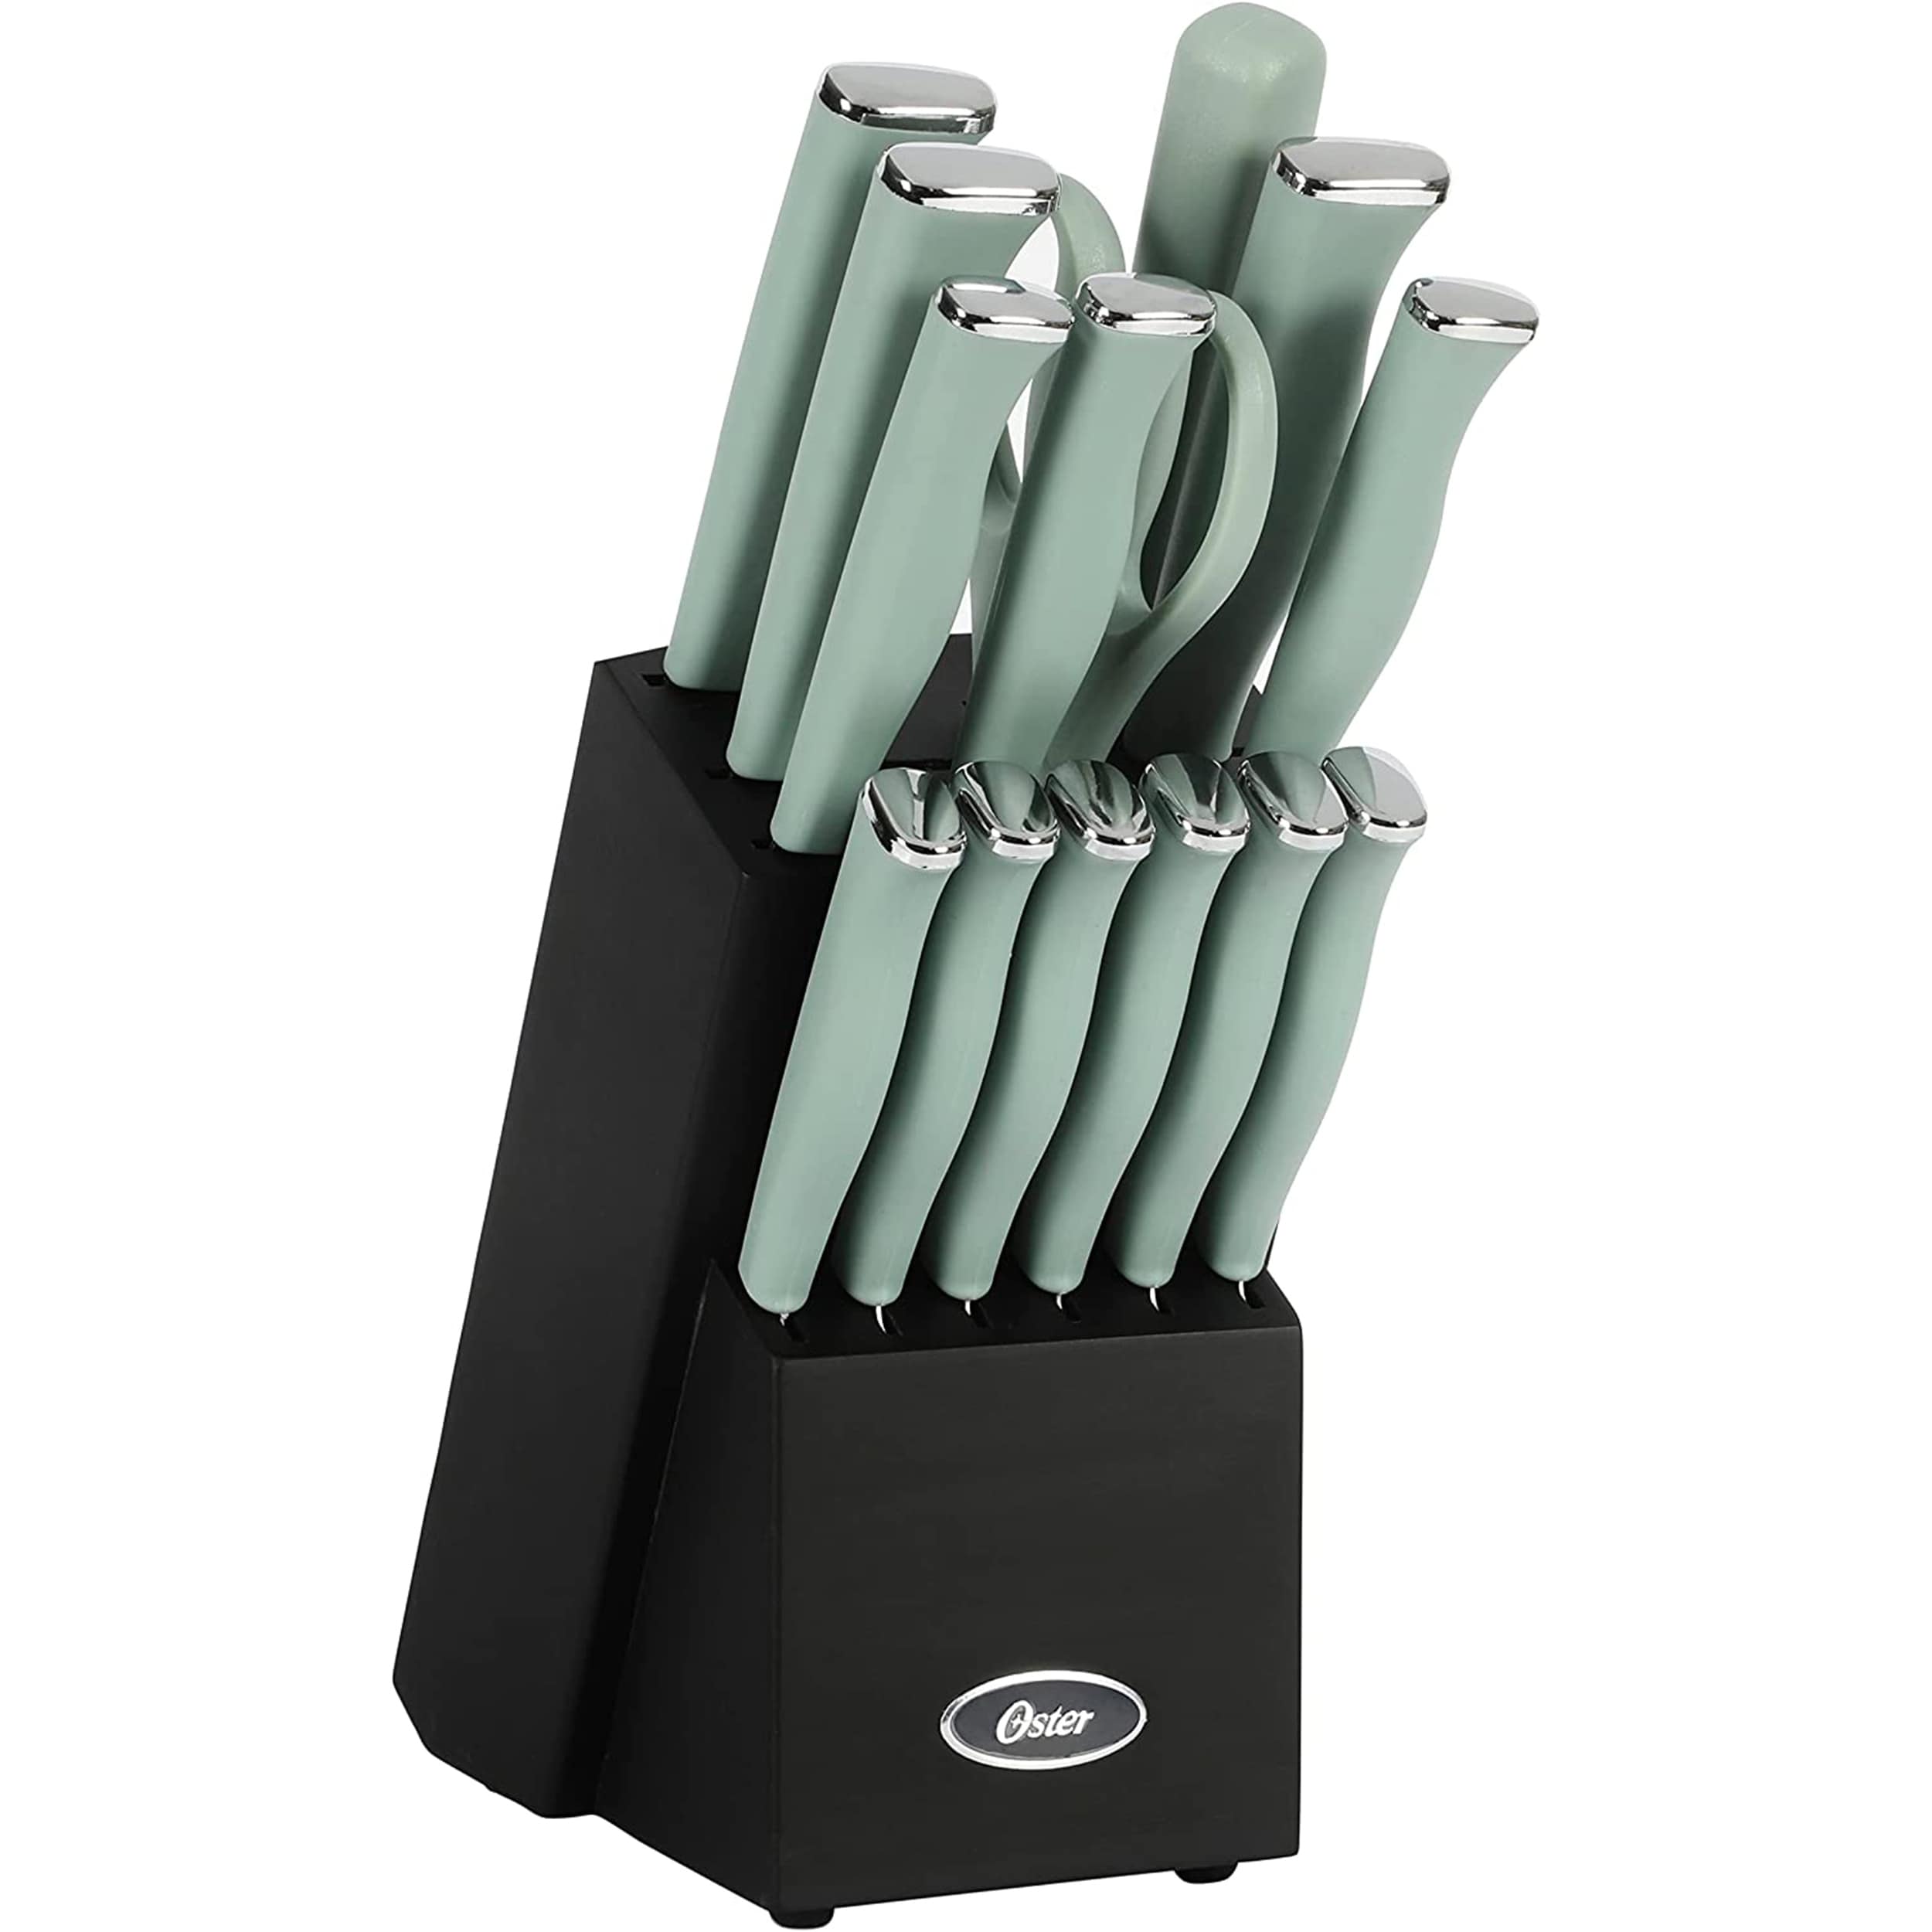 15 Pieces Stainless Steel Knife Block Set with Ergonomic Handle - Costway